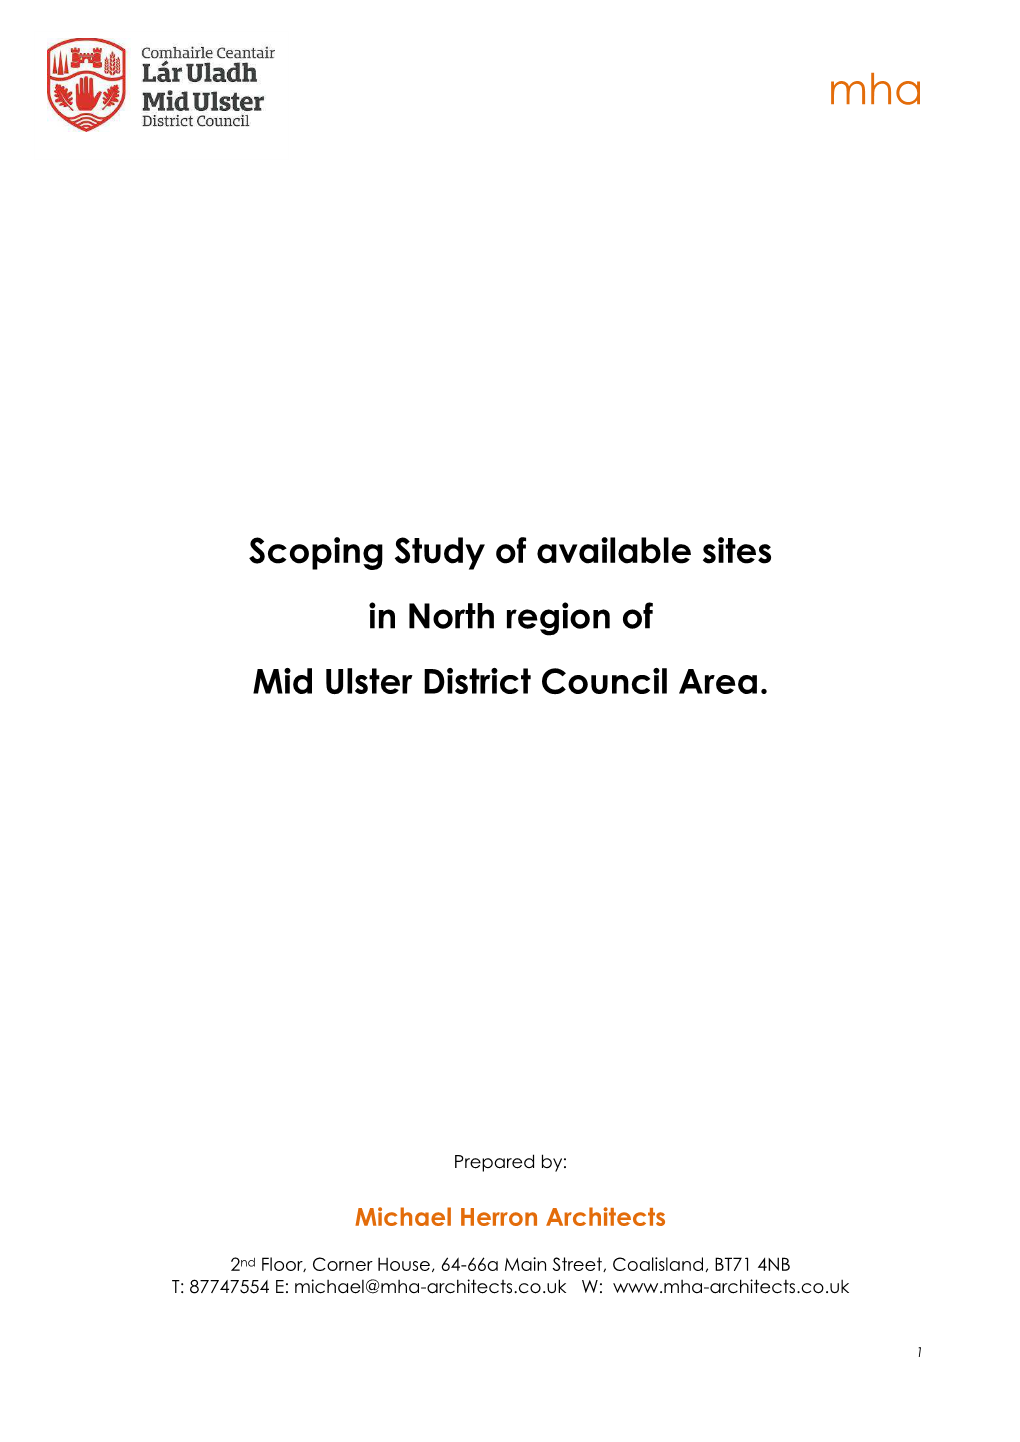 Scoping Study of Available Sites in North Region of Mid Ulster District Council Area